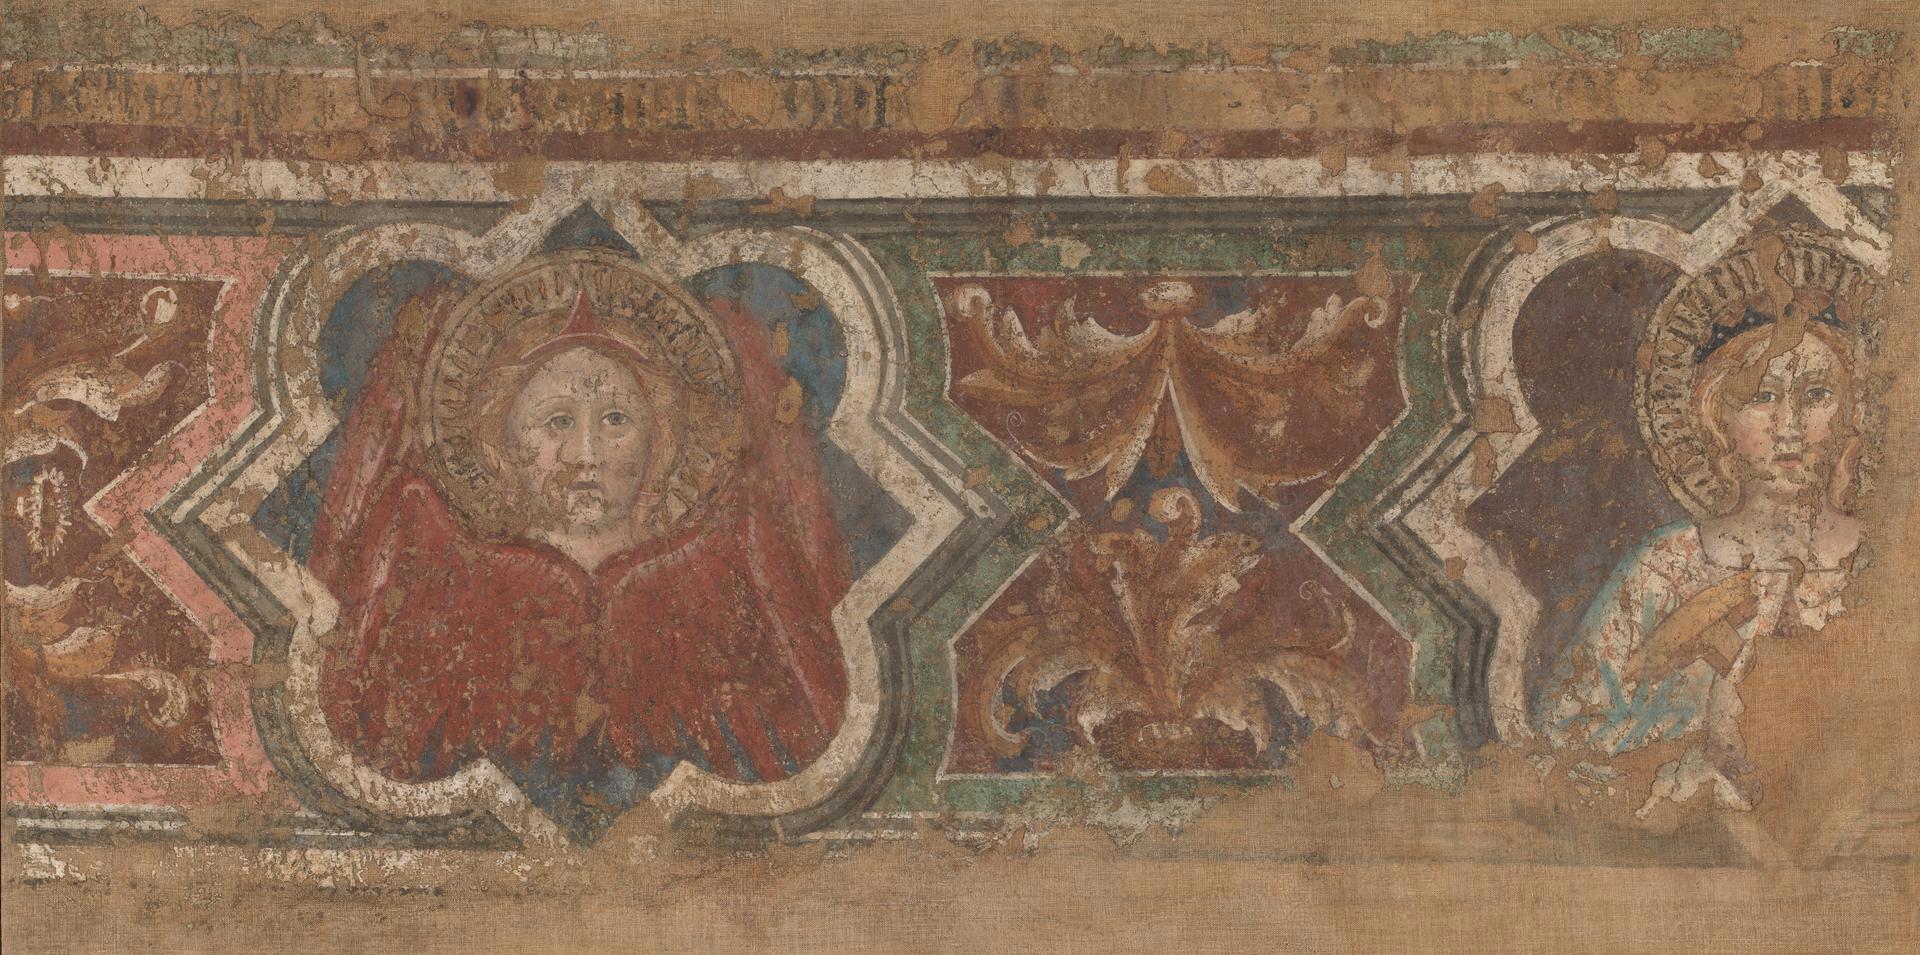 Decorative Border with a Seraph and Saint Catherine by Spinello Aretino